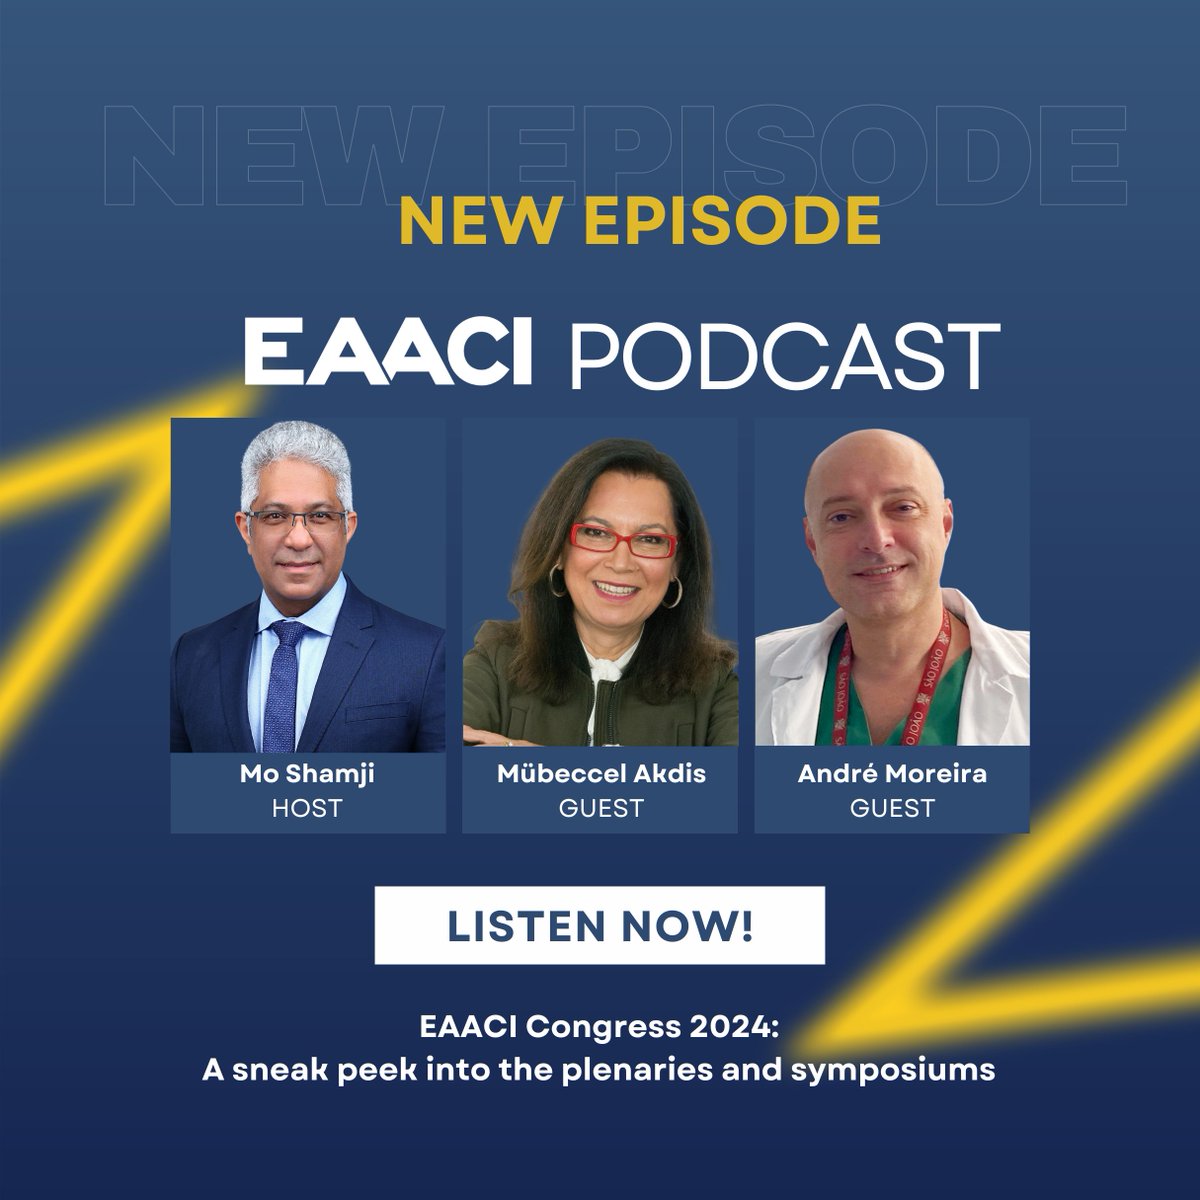 🎙Dive deep into the heart of the EAACI Congress 2024 with the third episode of our official podcast! Get ready for an exclusive sneak peek into the plenaries and symposiums featuring 2 incredible guests.🎧 Don't miss out! Listen now: linktr.ee/eaaci #EAACIPodcast